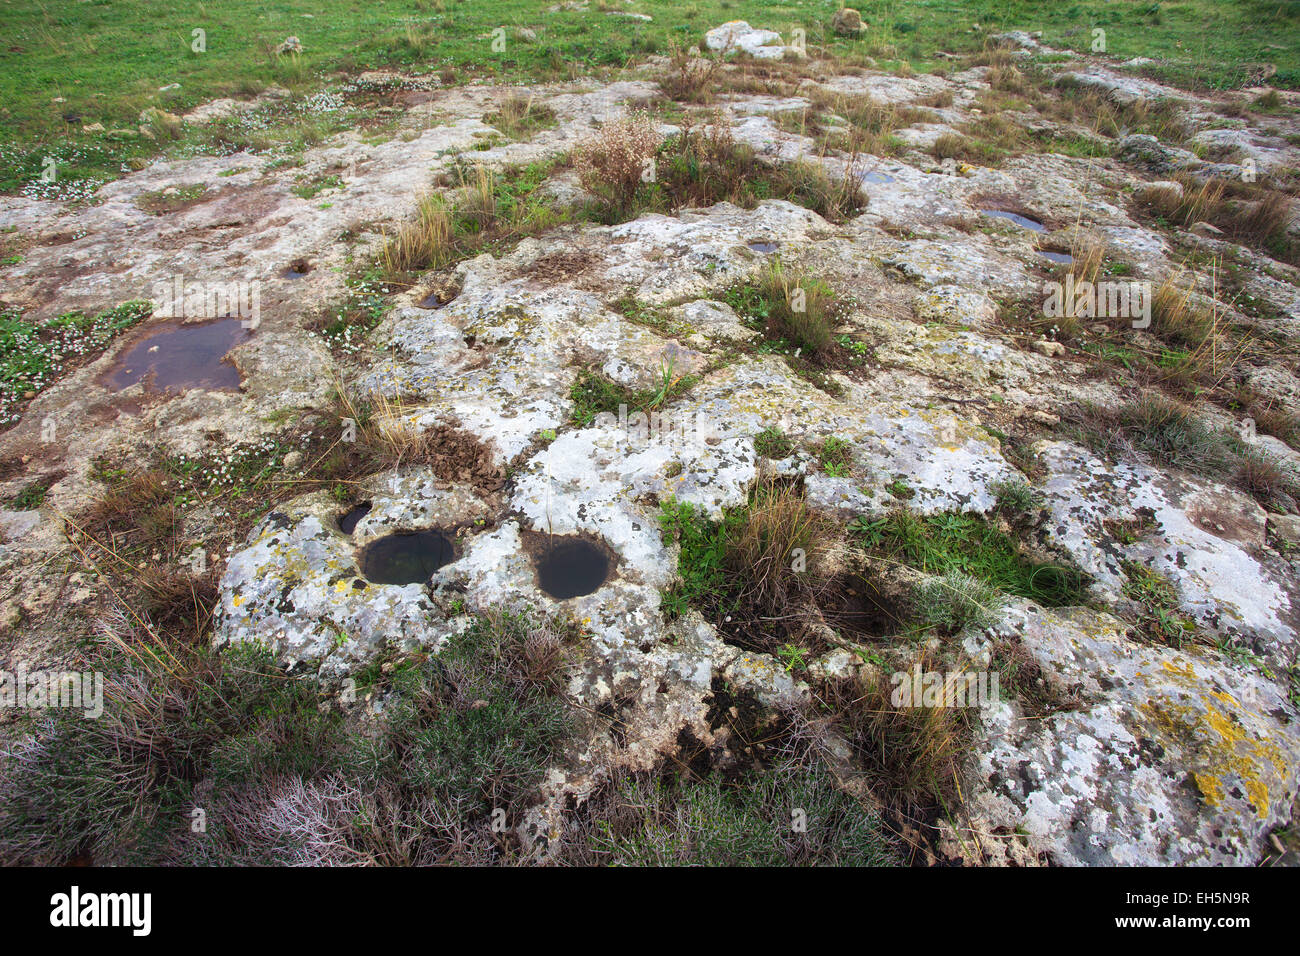 Stentinello, neolithic village site and hole for poles in Syracuse coast Stock Photo